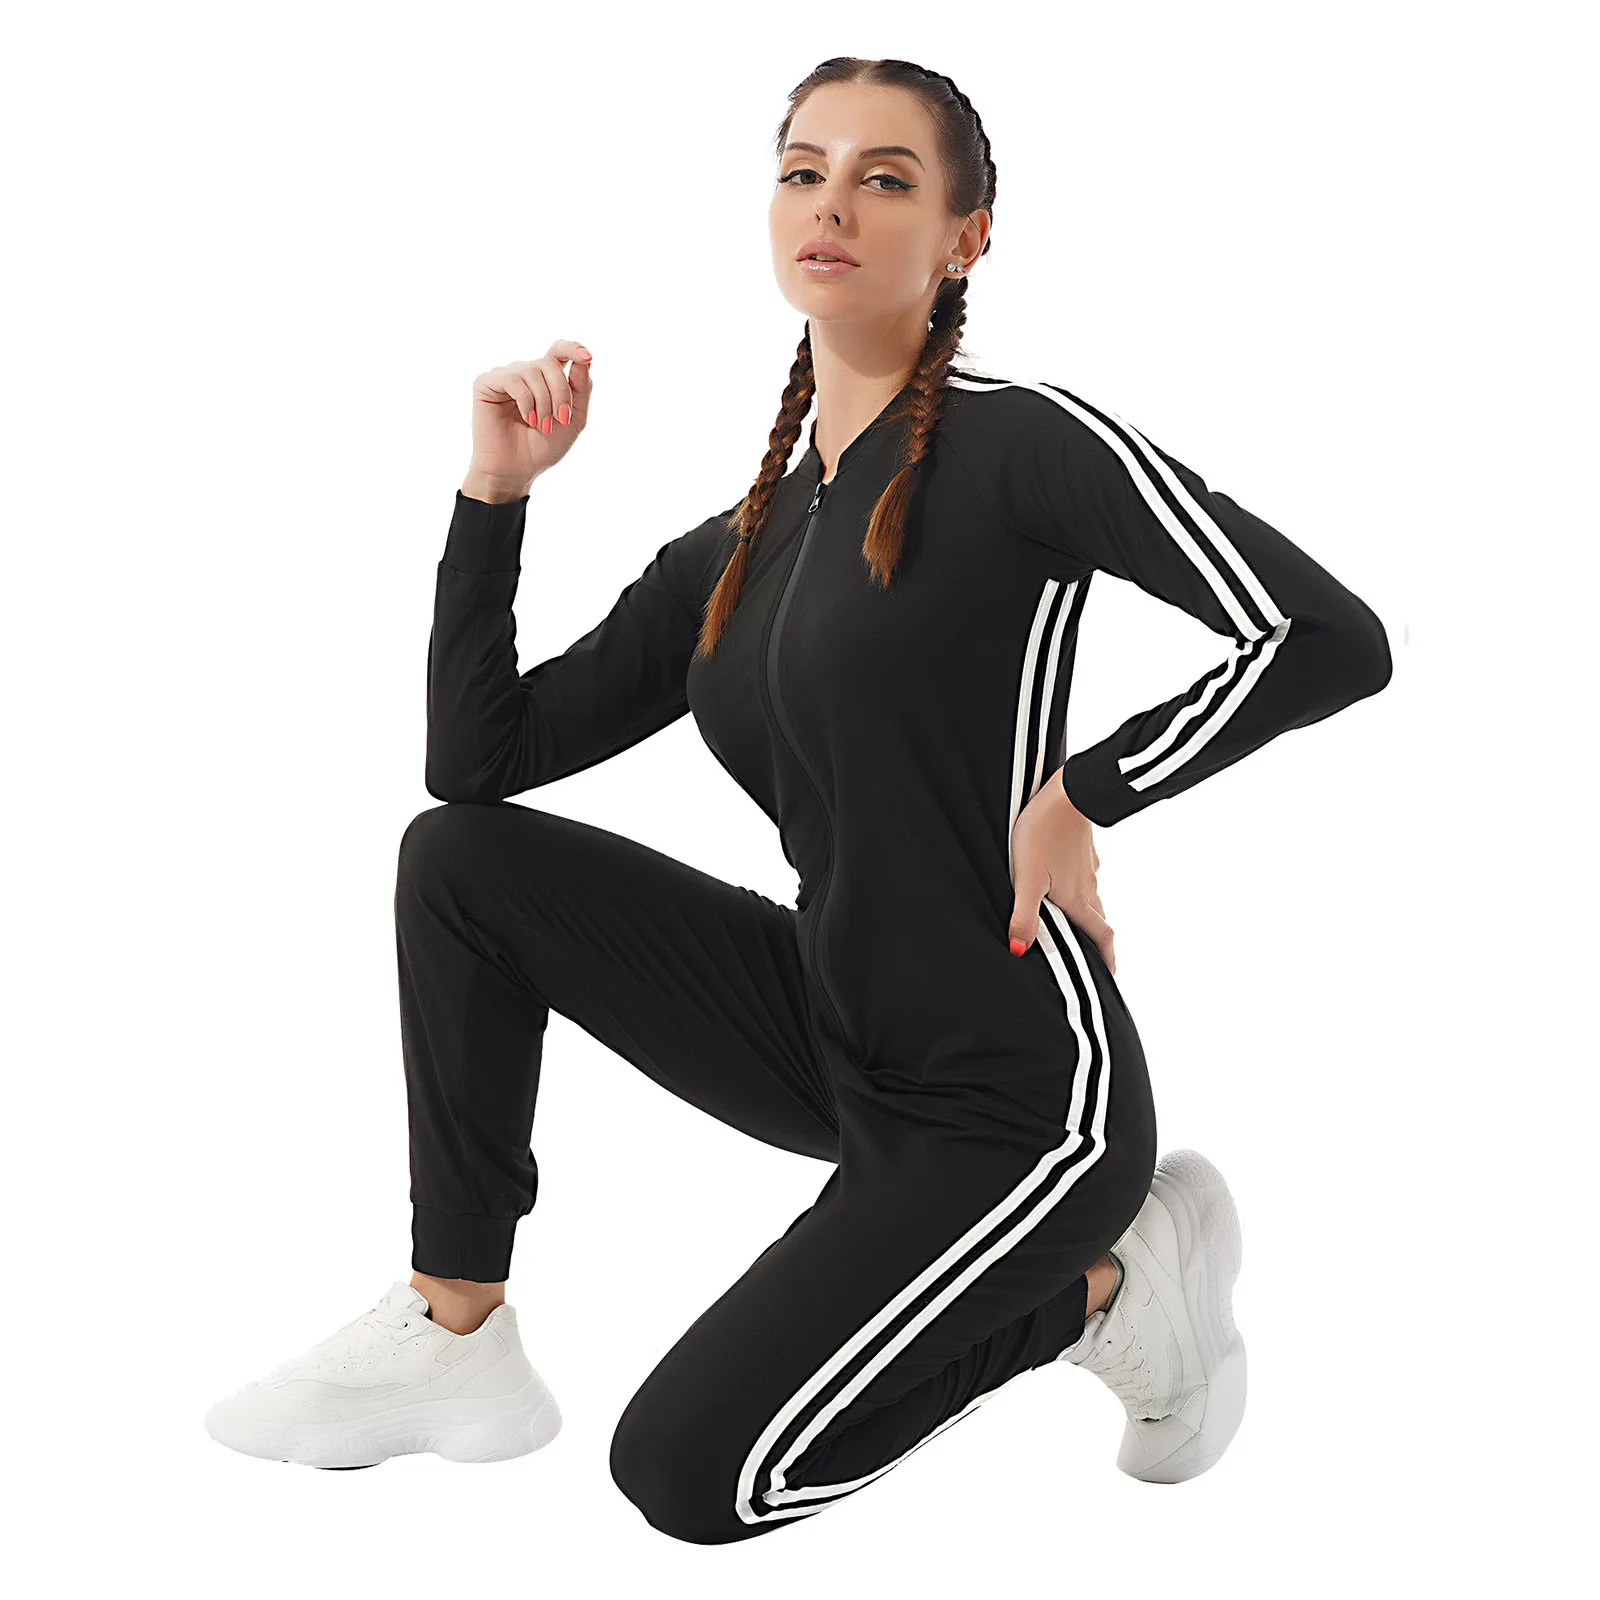 Black Women One-piece Stretchy Gym Fitness Running Jumpsuits Sportswear Front Zipper Side Stripes Pencil Pants Jumpsuit - Jumpsuits - AliExpress